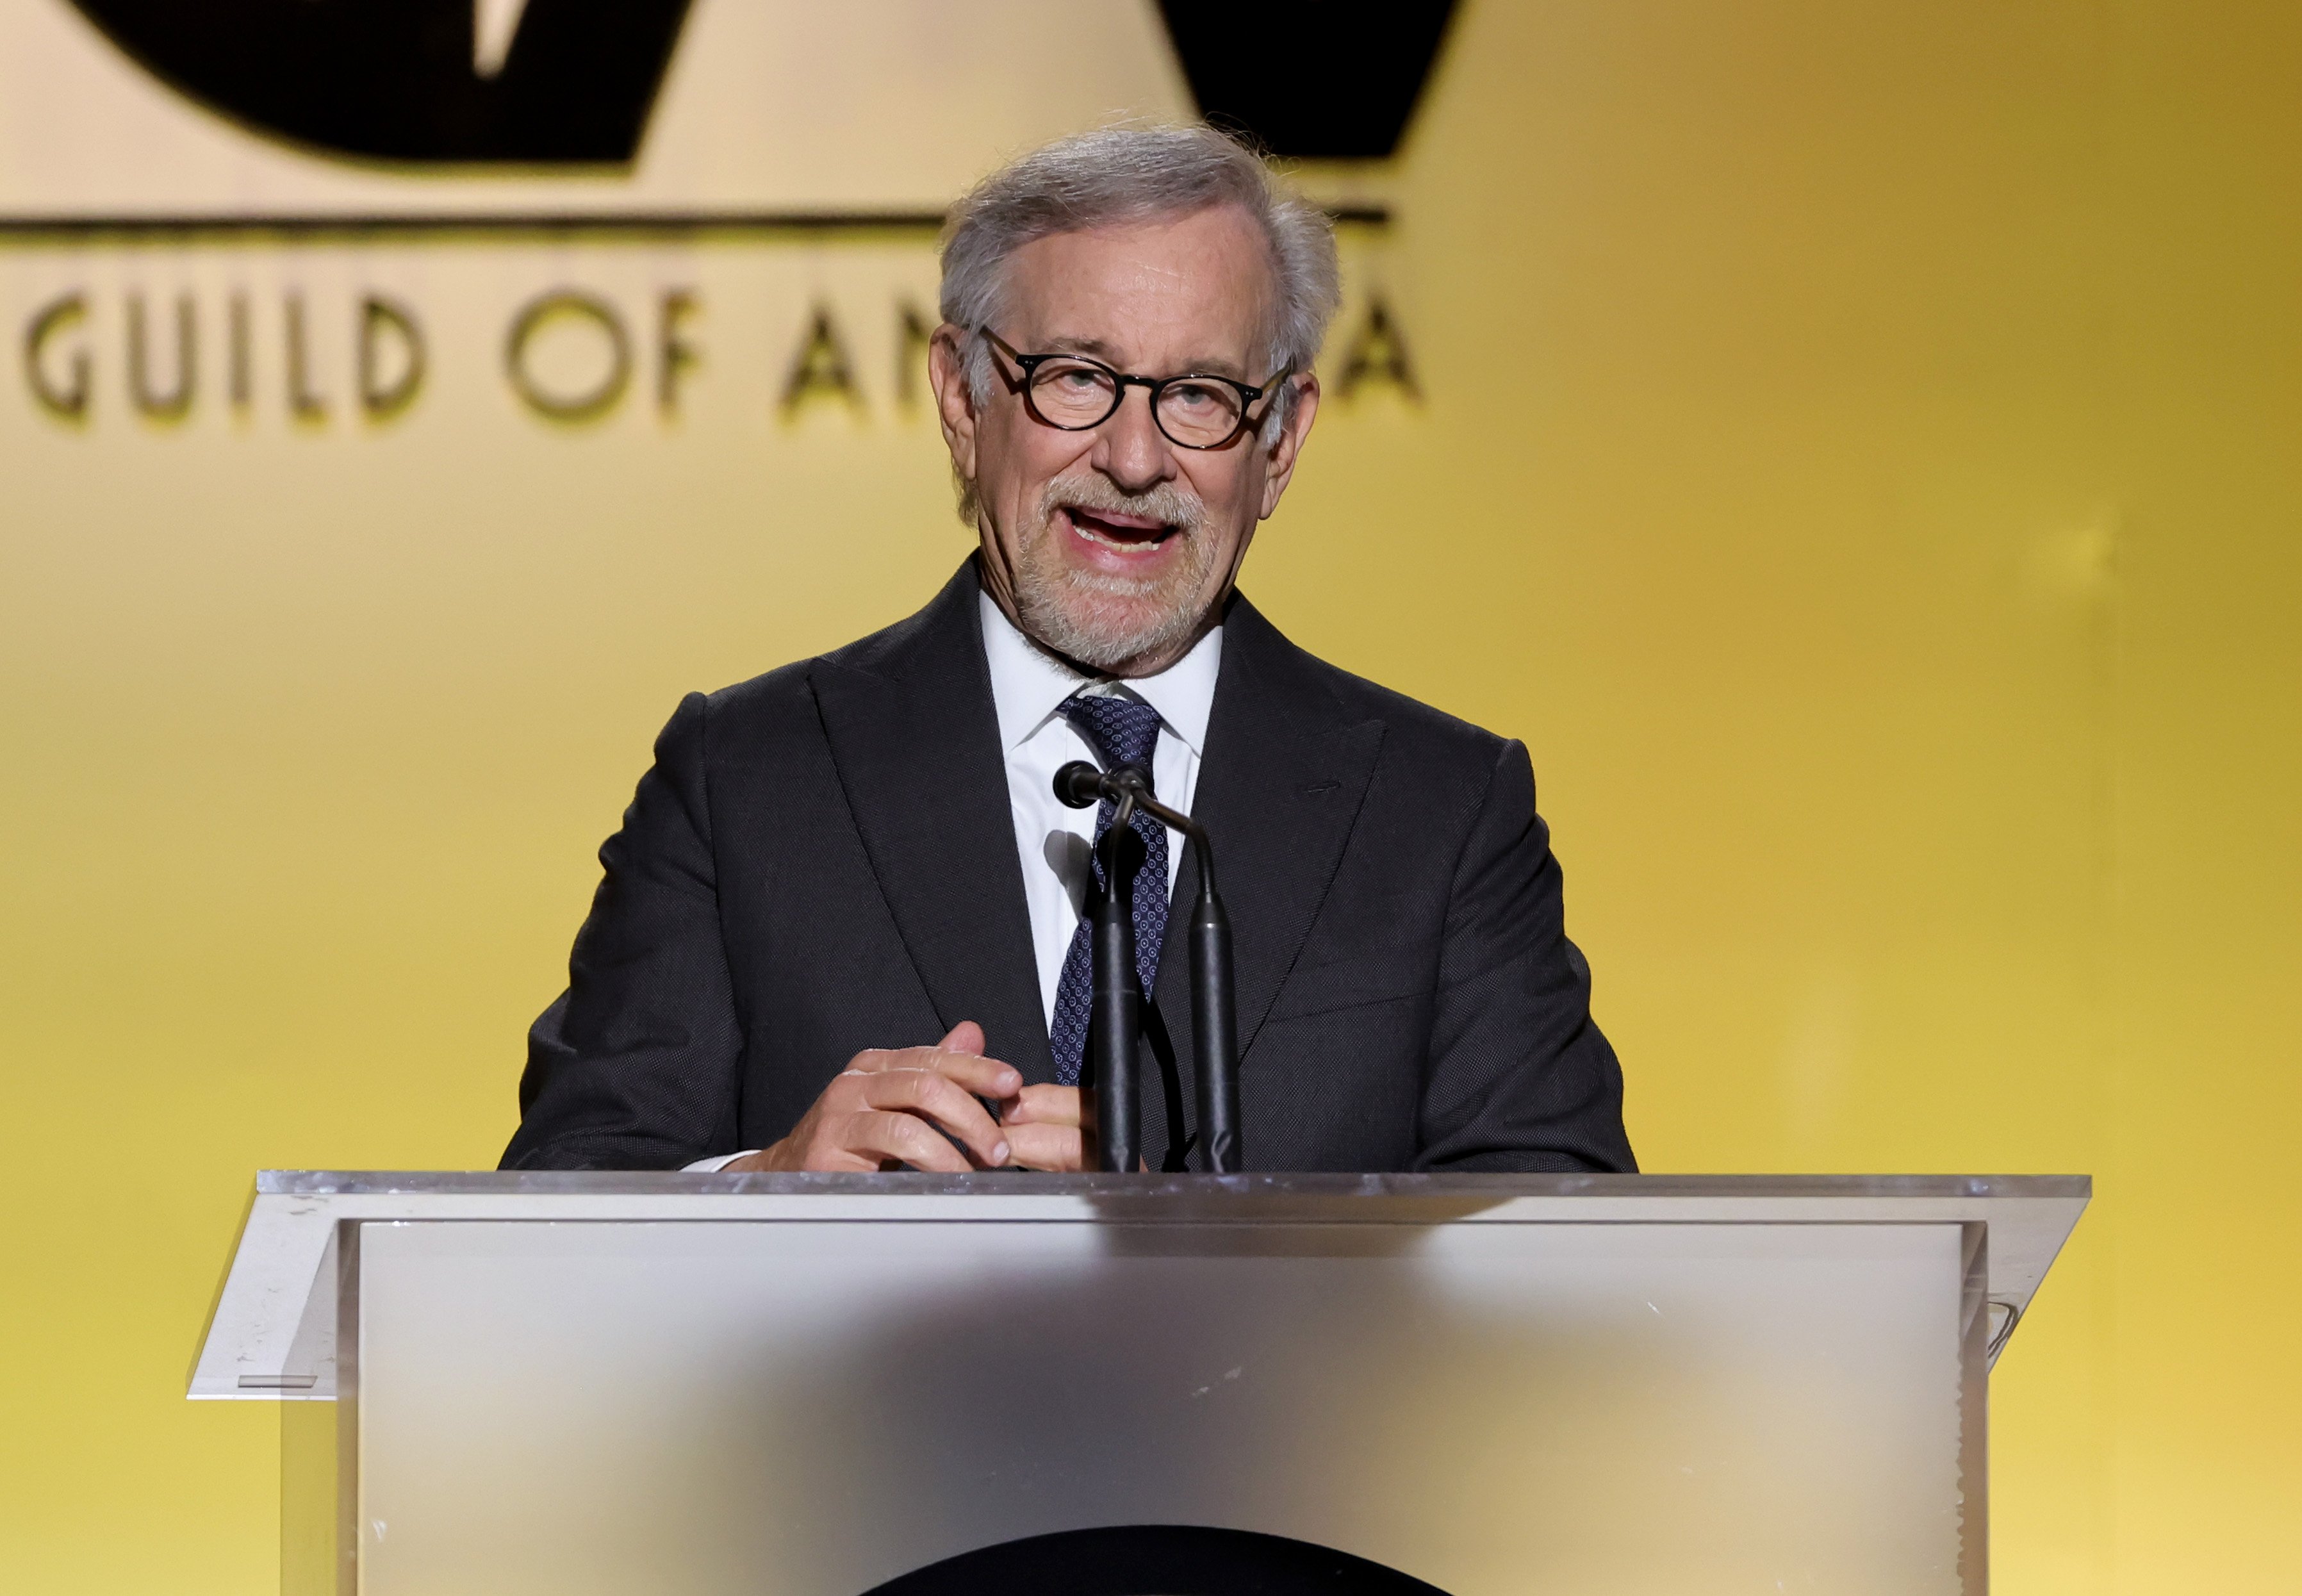 Steven Spielberg from West Side Story speaks at the Producer's Guild of America Awards